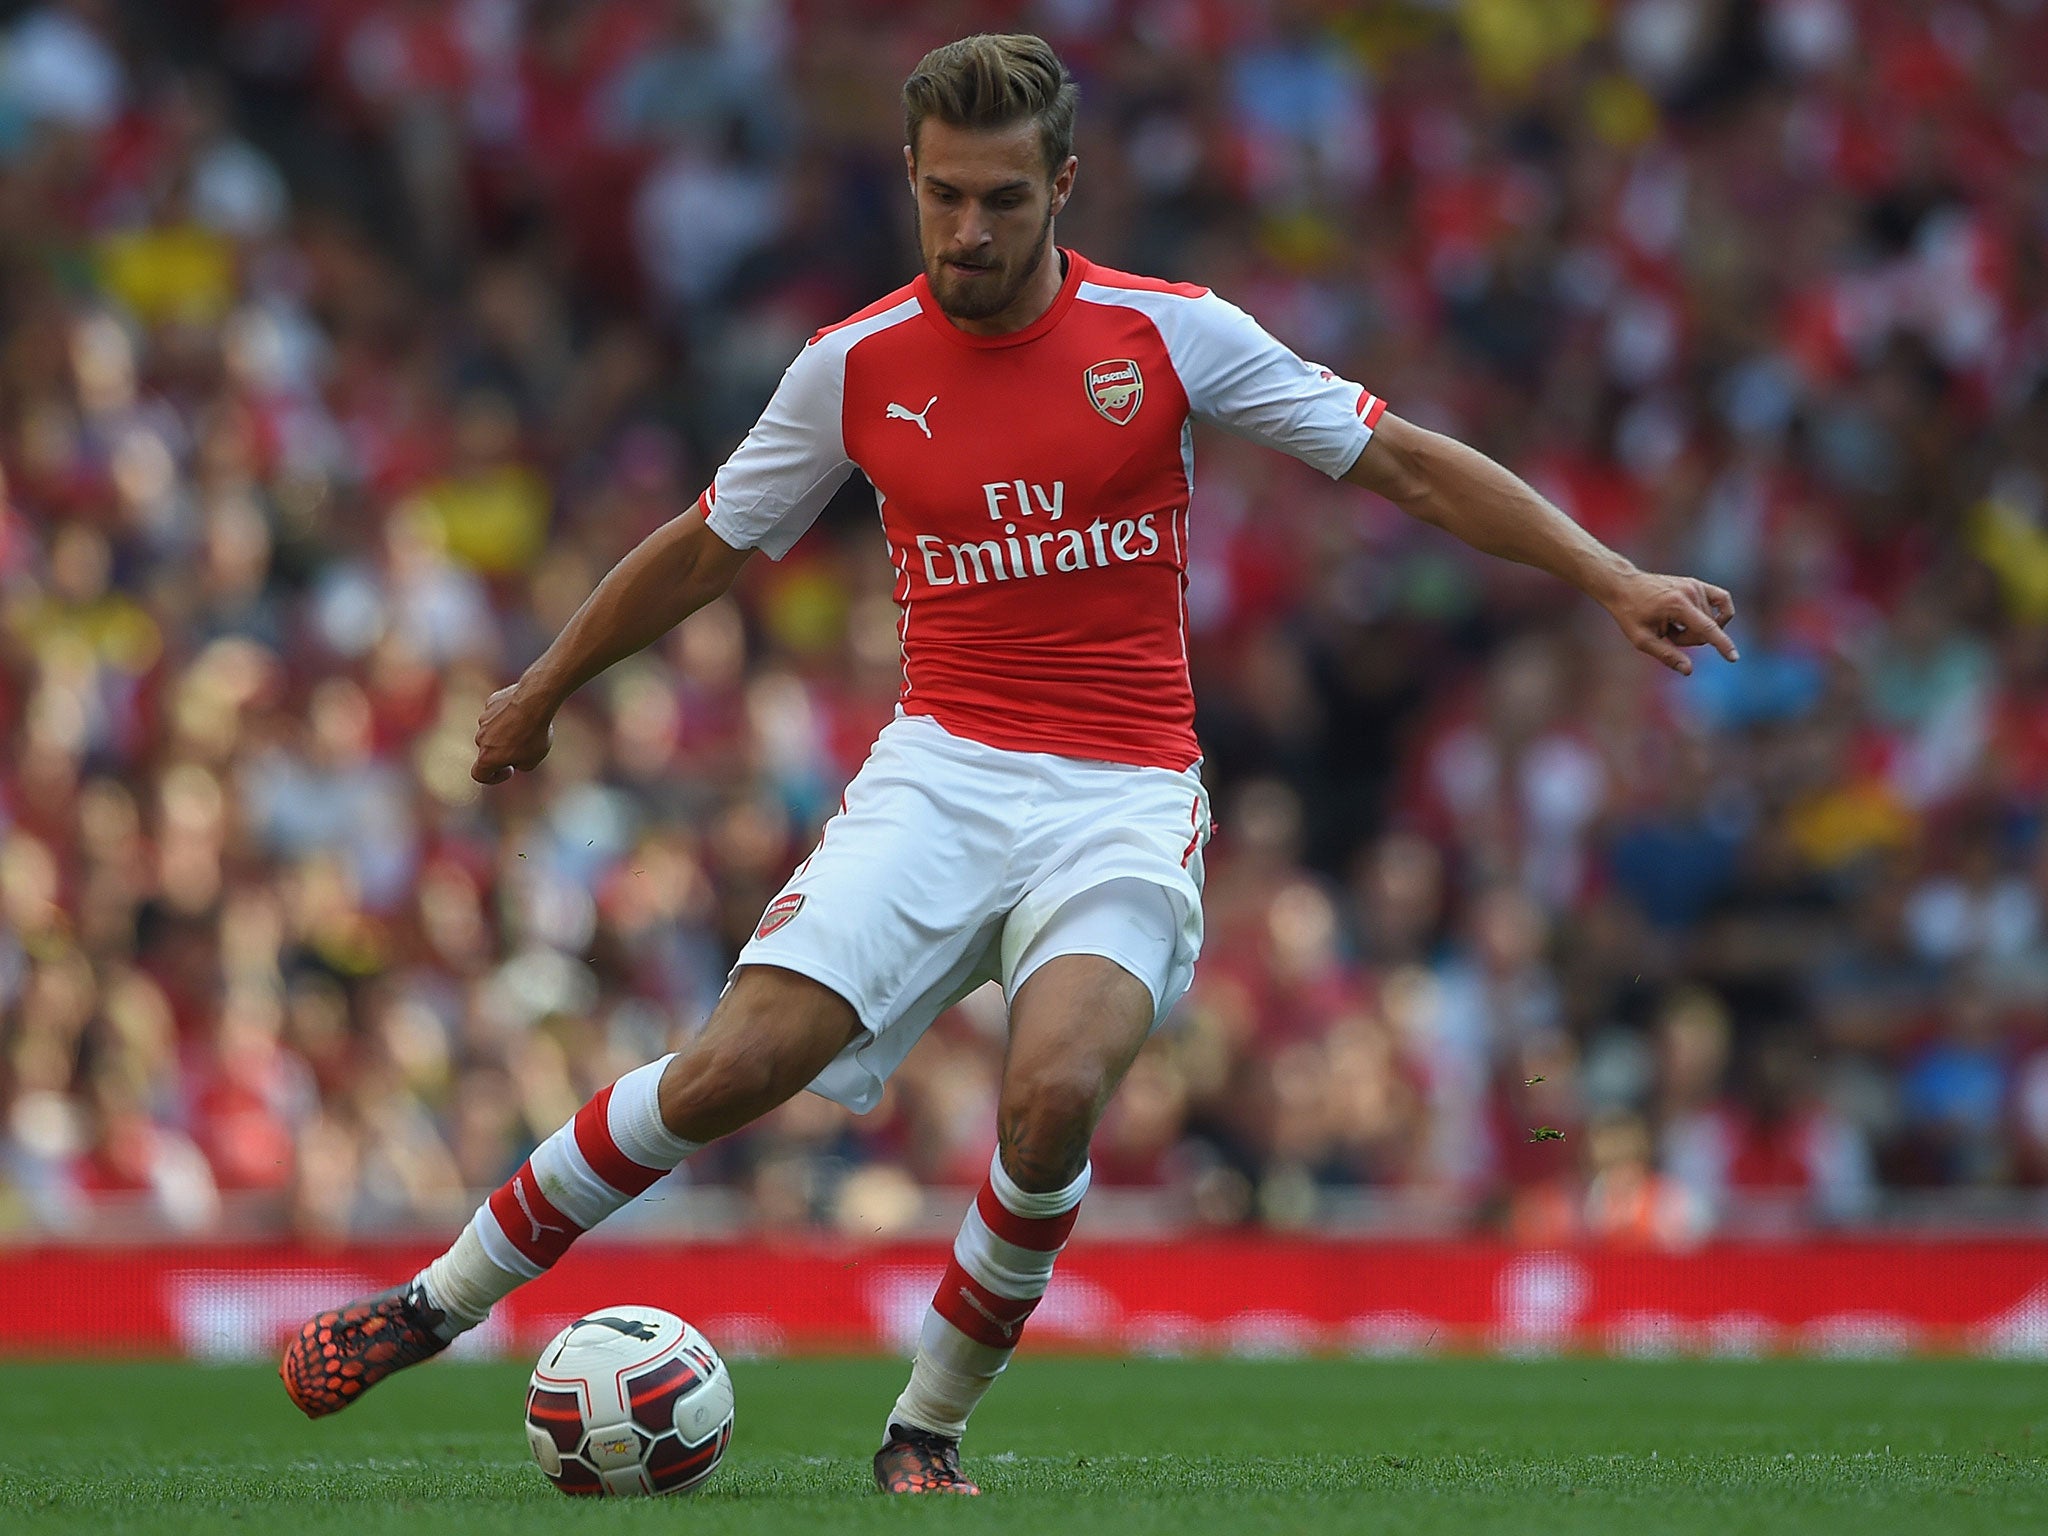 Aaron Ramsey is ready to be Arsenal's goalscoring force from midfield